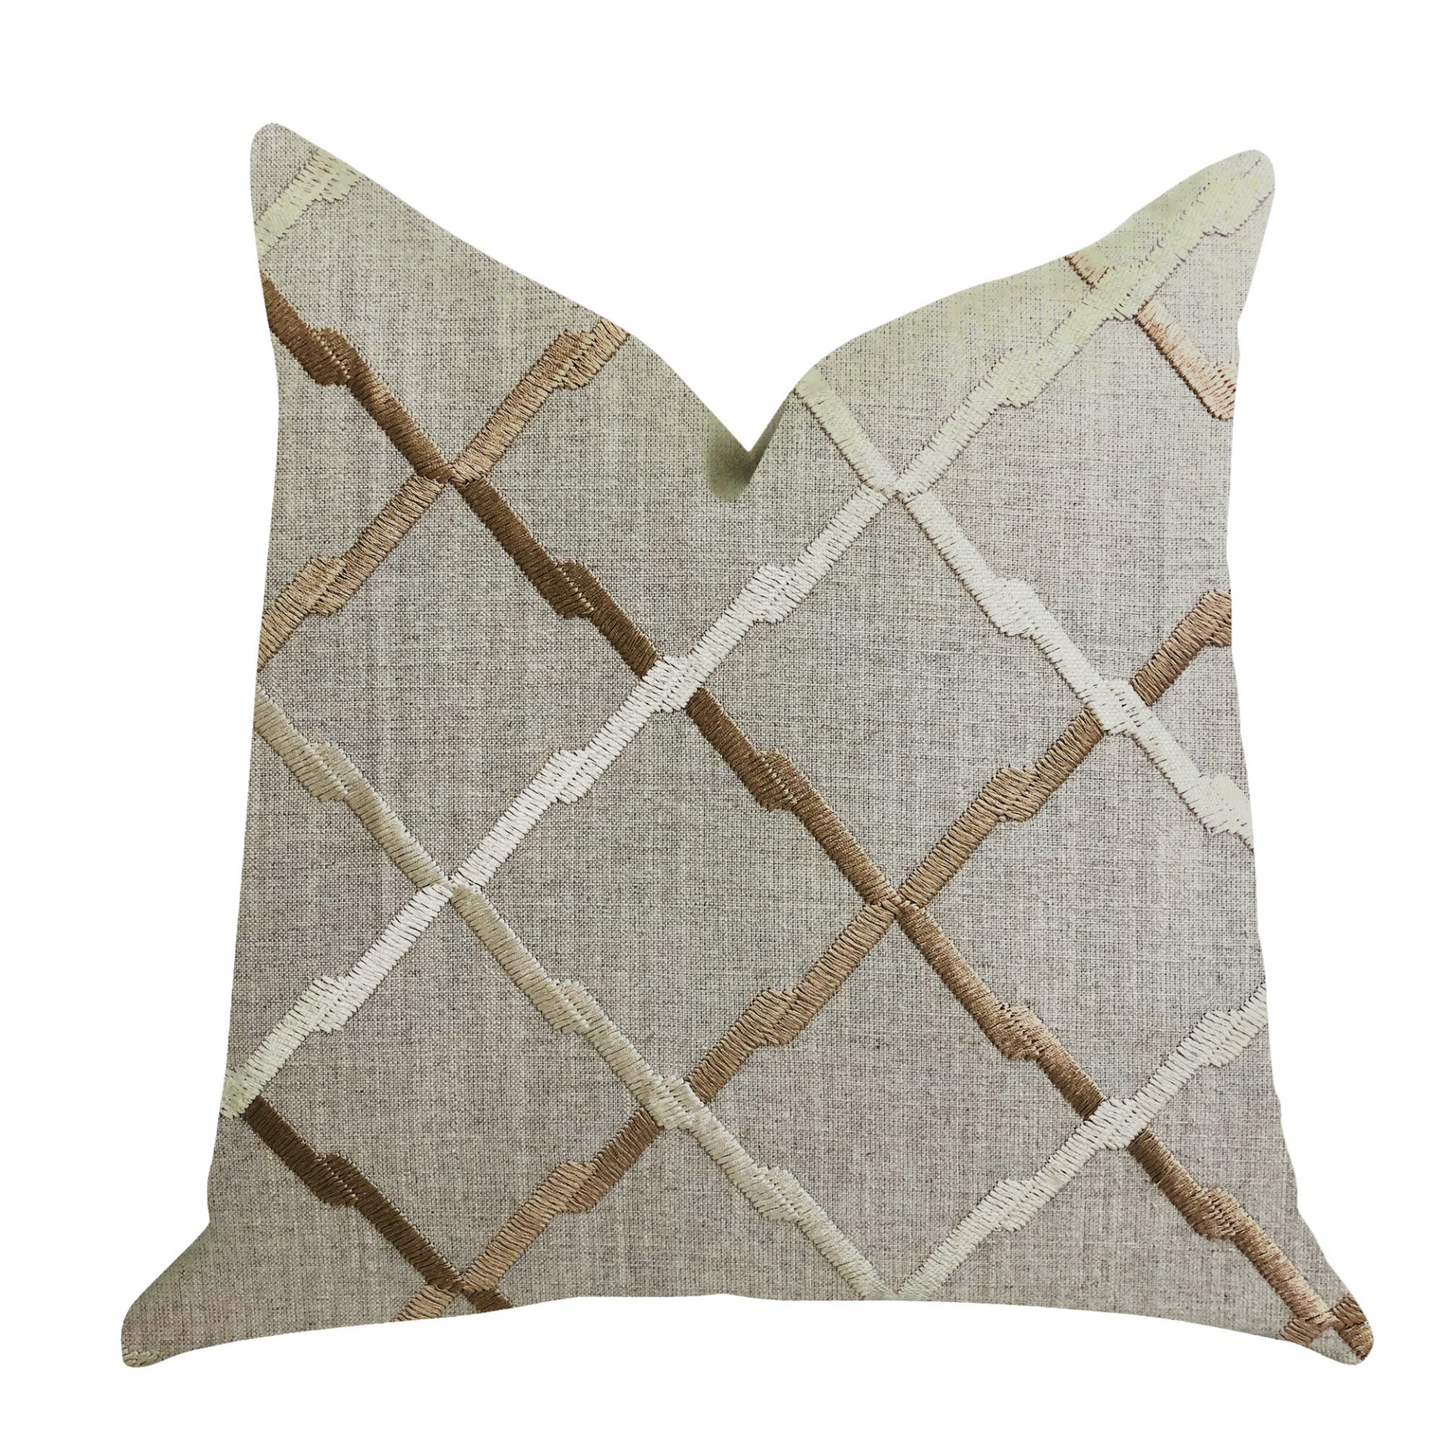 Urban Square Luxury Throw Pillow - Brown and Beige